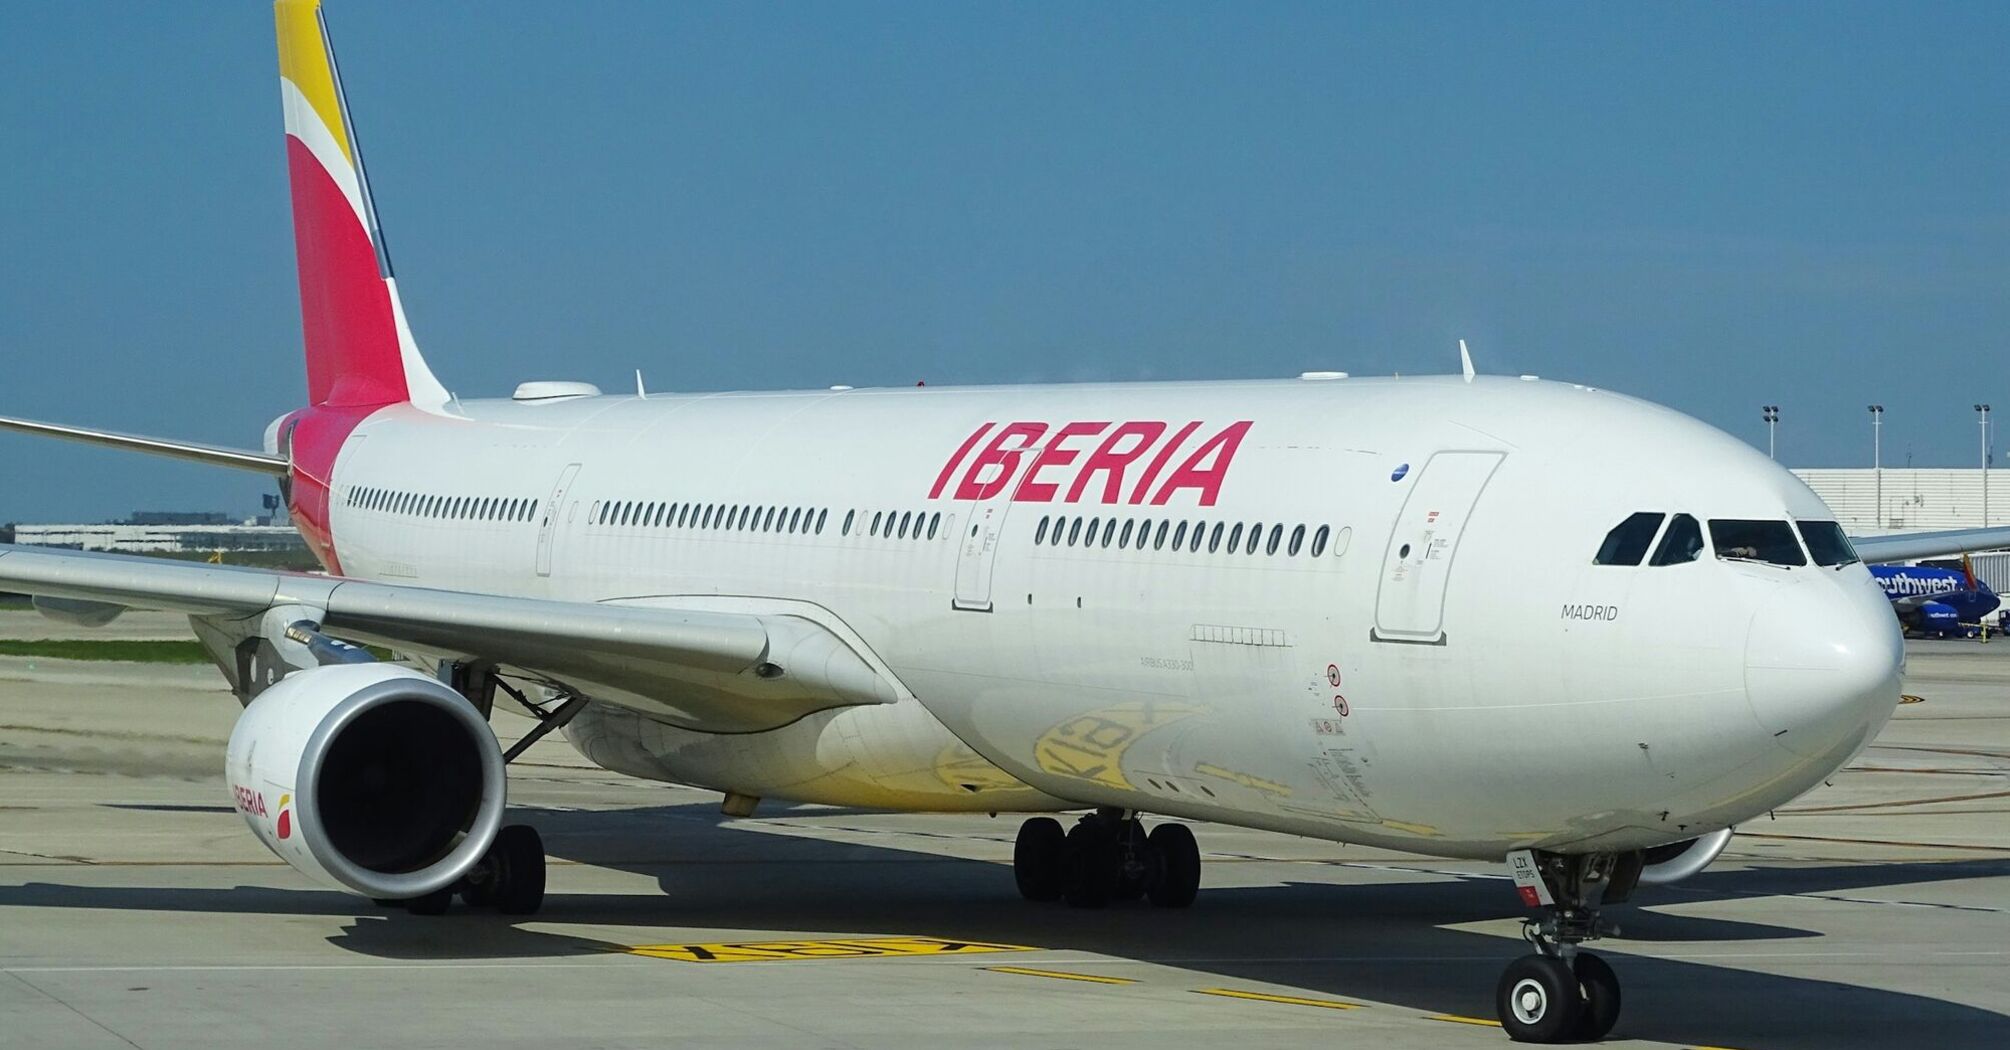 An Iberia aircraft parked on the tarmac